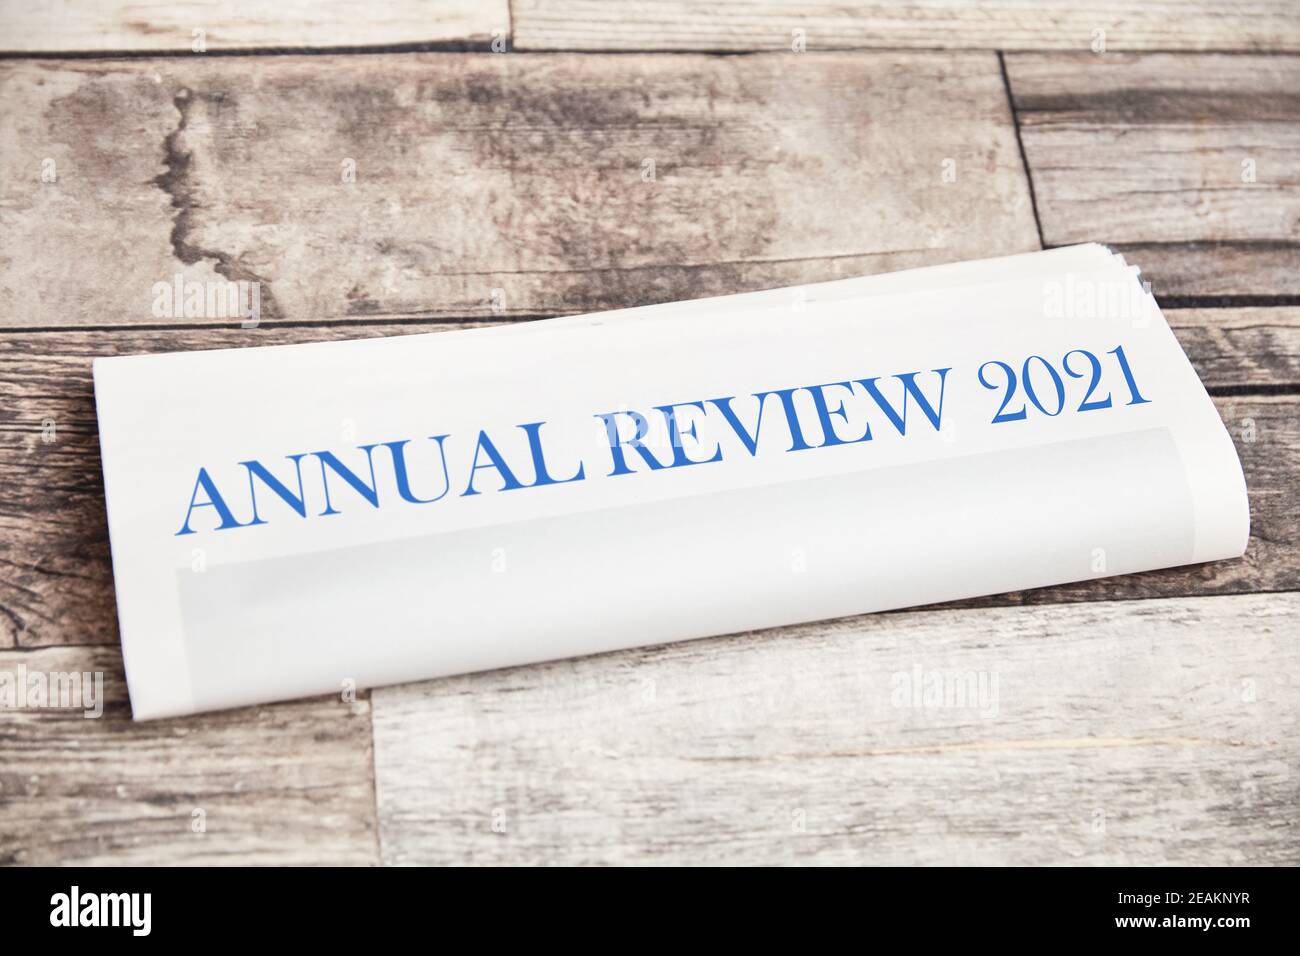 Annual Review 2021 on a folded newspaper as the front page Stock Photo